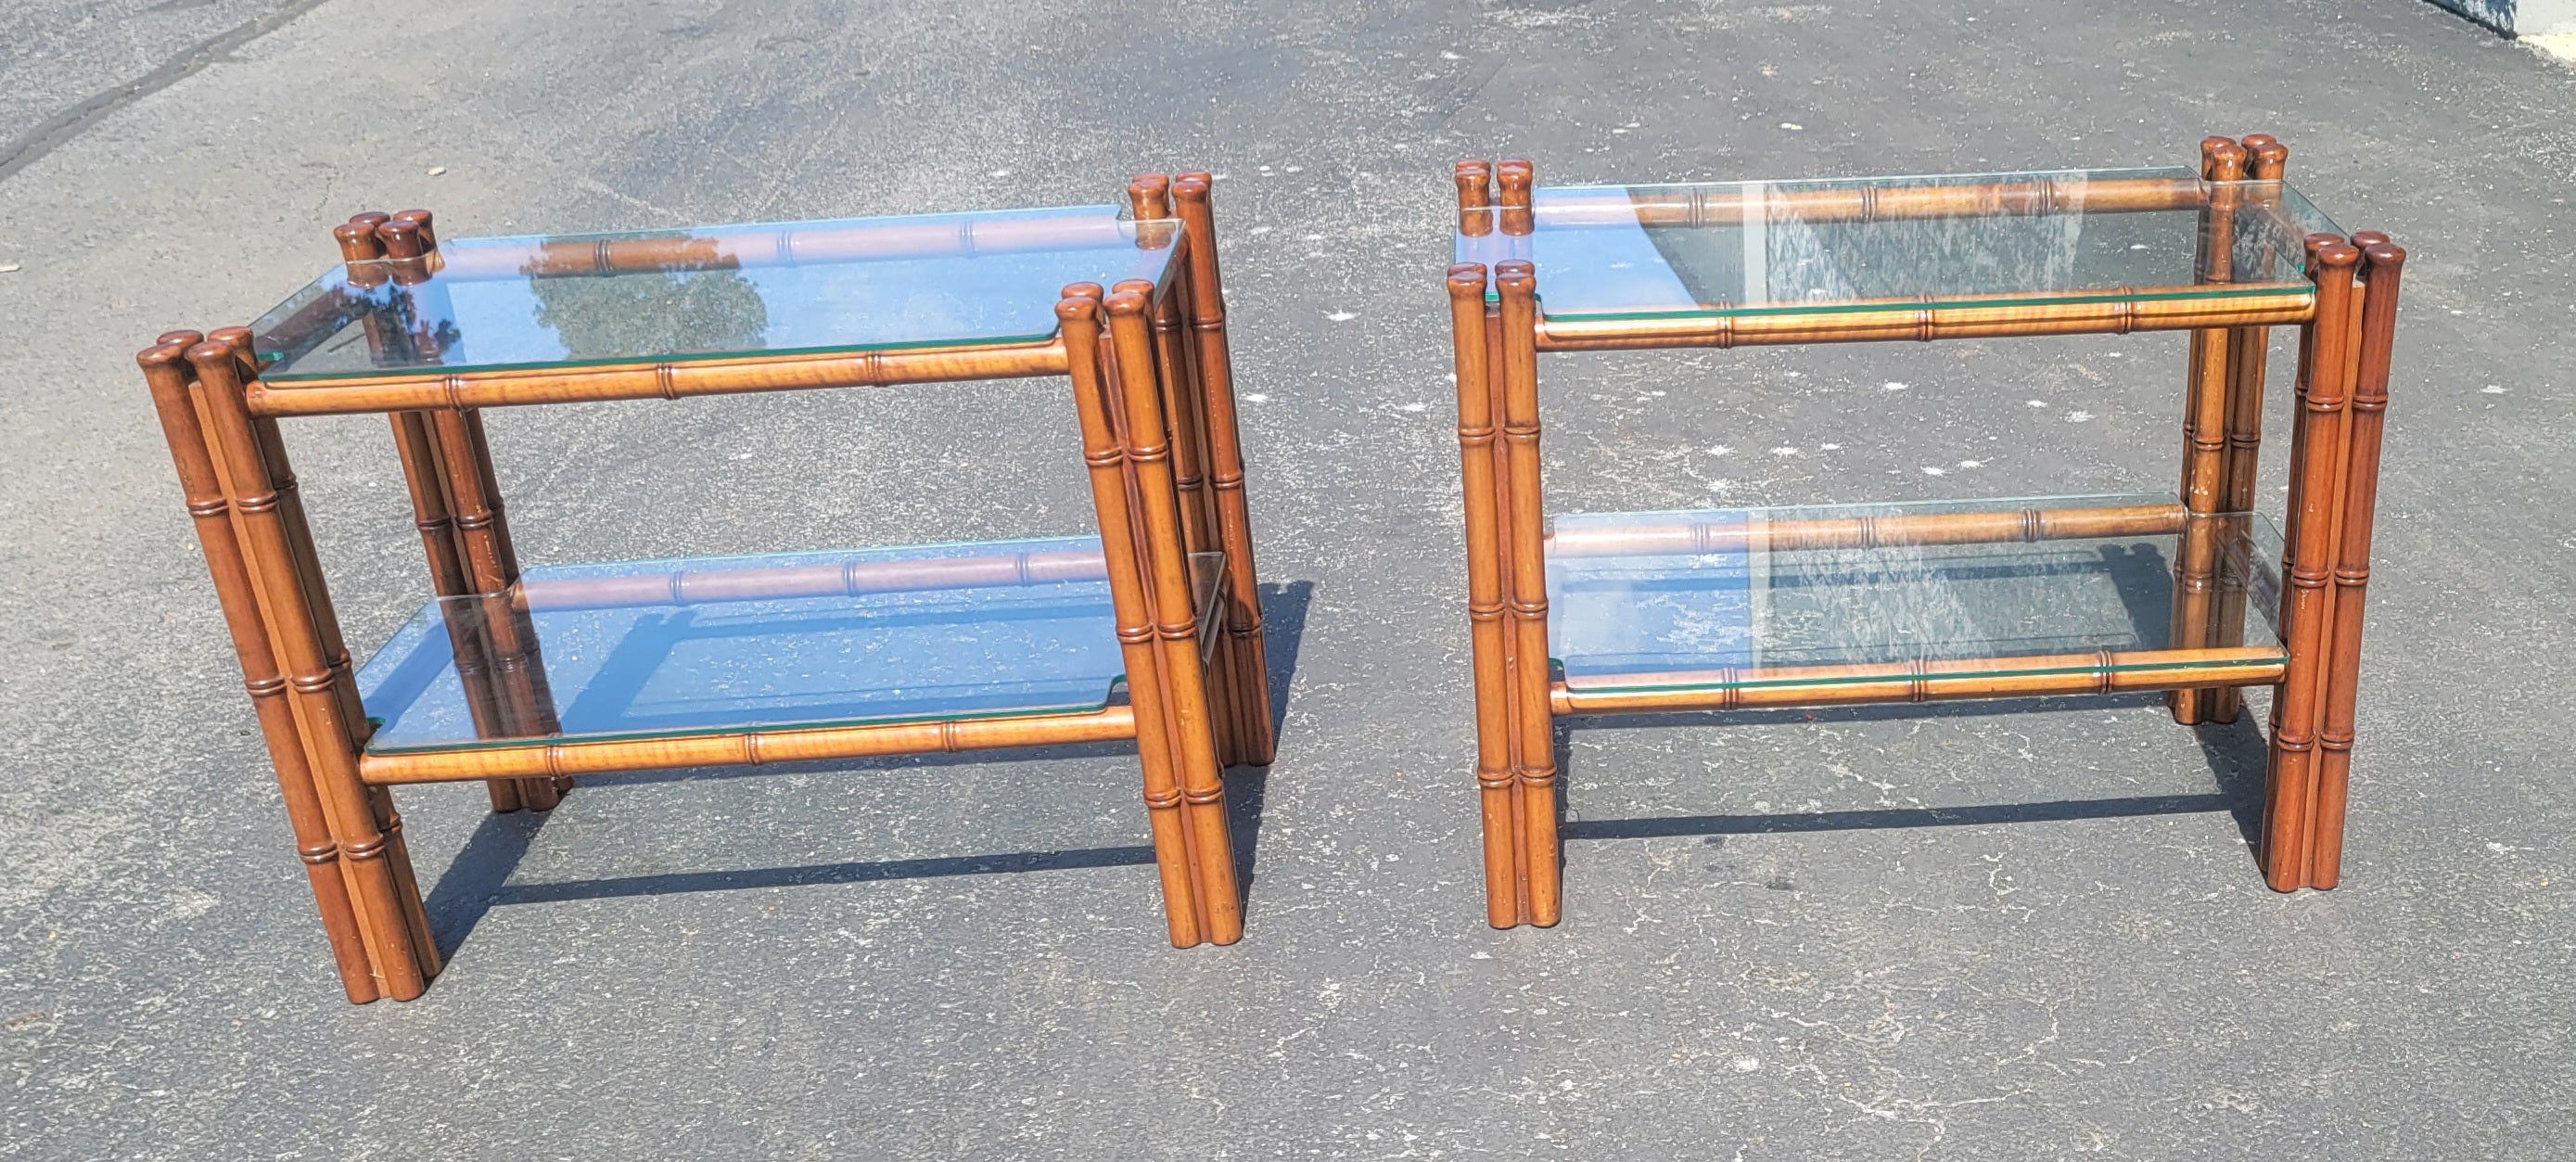 An exquisite pair Regency Style Faux Bamboo Mahogany Two Tier Glass Side Tables with custom glass top and shelf. Absolutely charming set , measuring 16 inches in width, 27.5 inches in depth and 21 inches in height. A true rare find. The matching